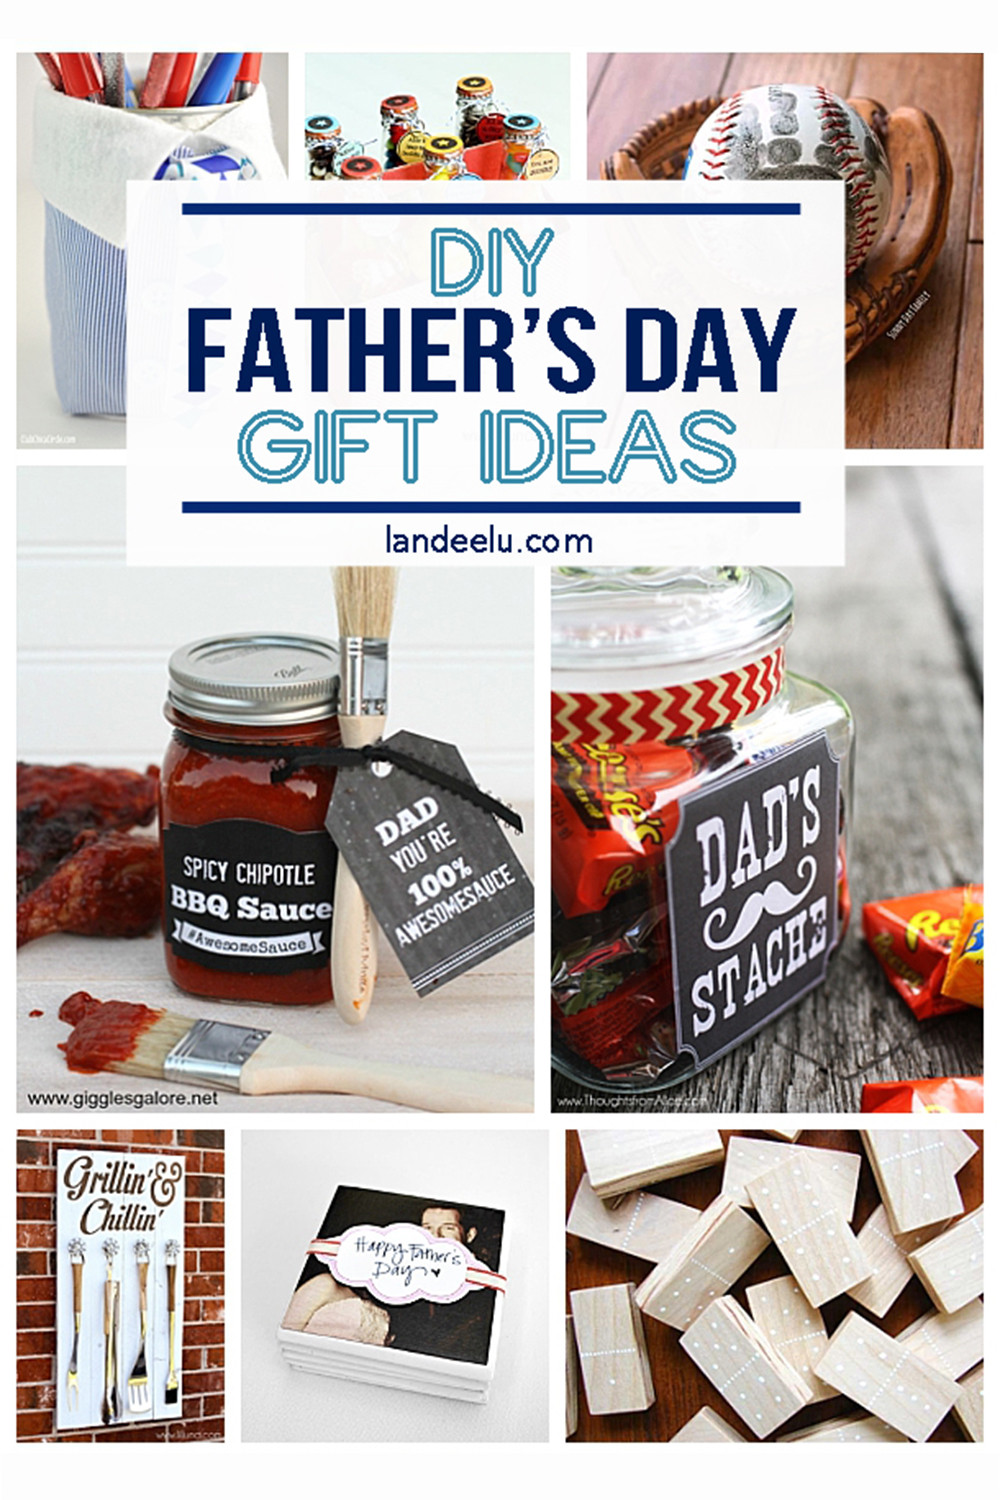 DIY Gifts For Fathers Day
 21 DIY Father s Day Gifts to Celebrate Dad landeelu